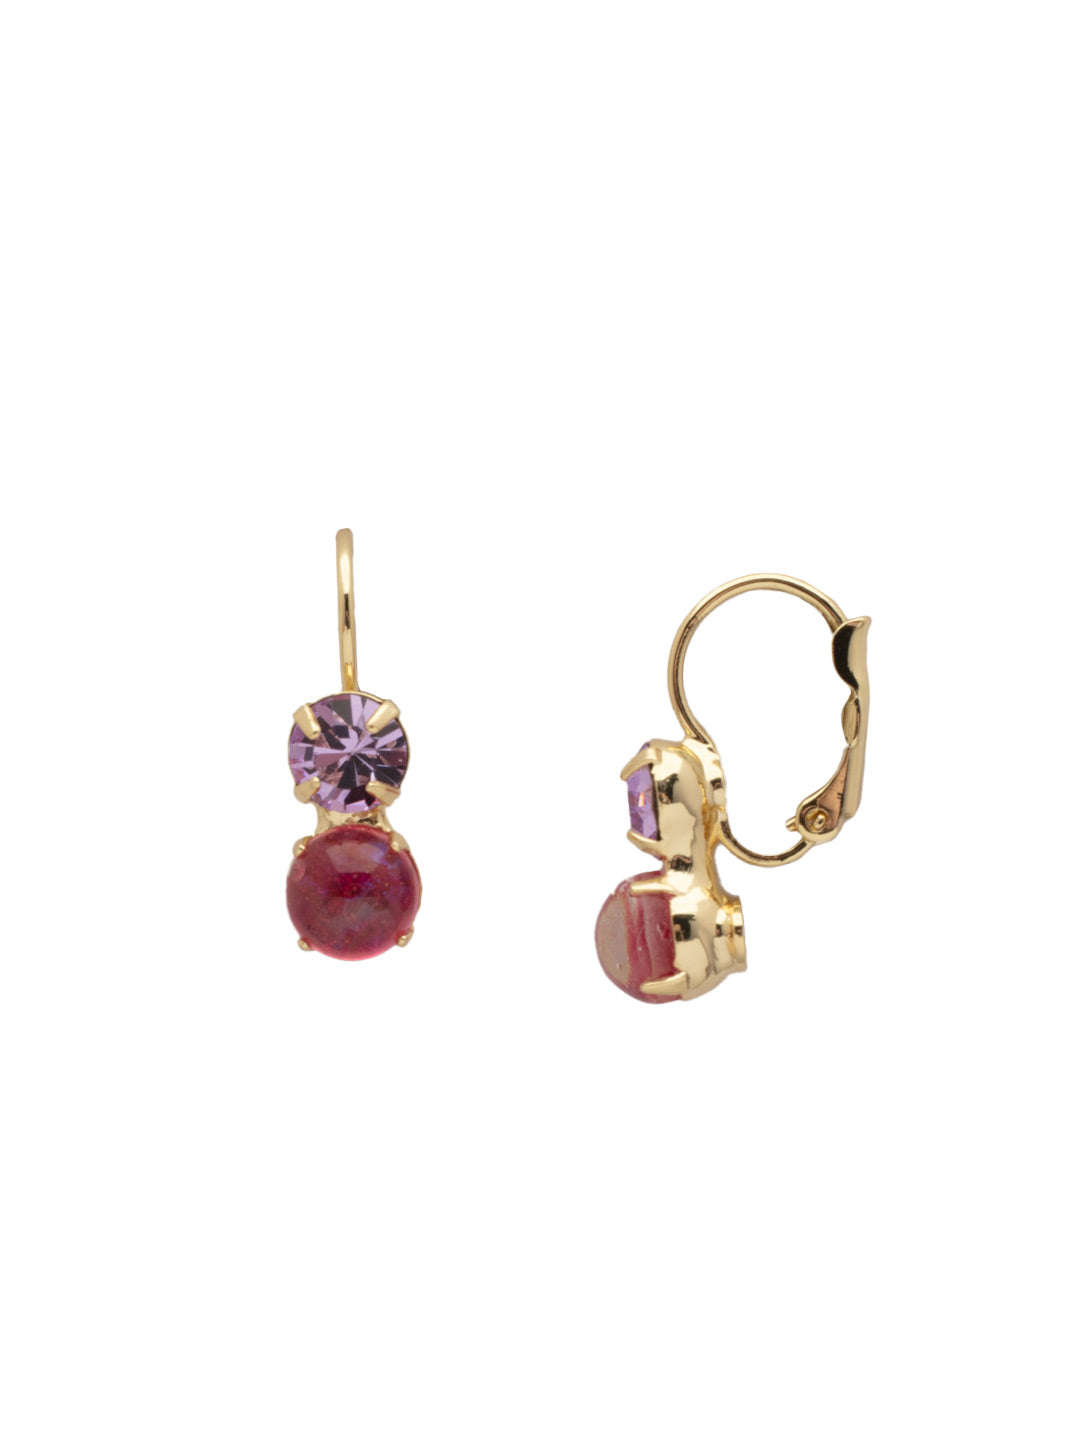 Xena Classic Dangle Earrings - EFF11BGPRI - <p>The Xena Classic Dangle Earrings feature two small round cut crystals and semi-precious stones dangling from a lever back French wire. From Sorrelli's Prism collection in our Bright Gold-tone finish.</p>